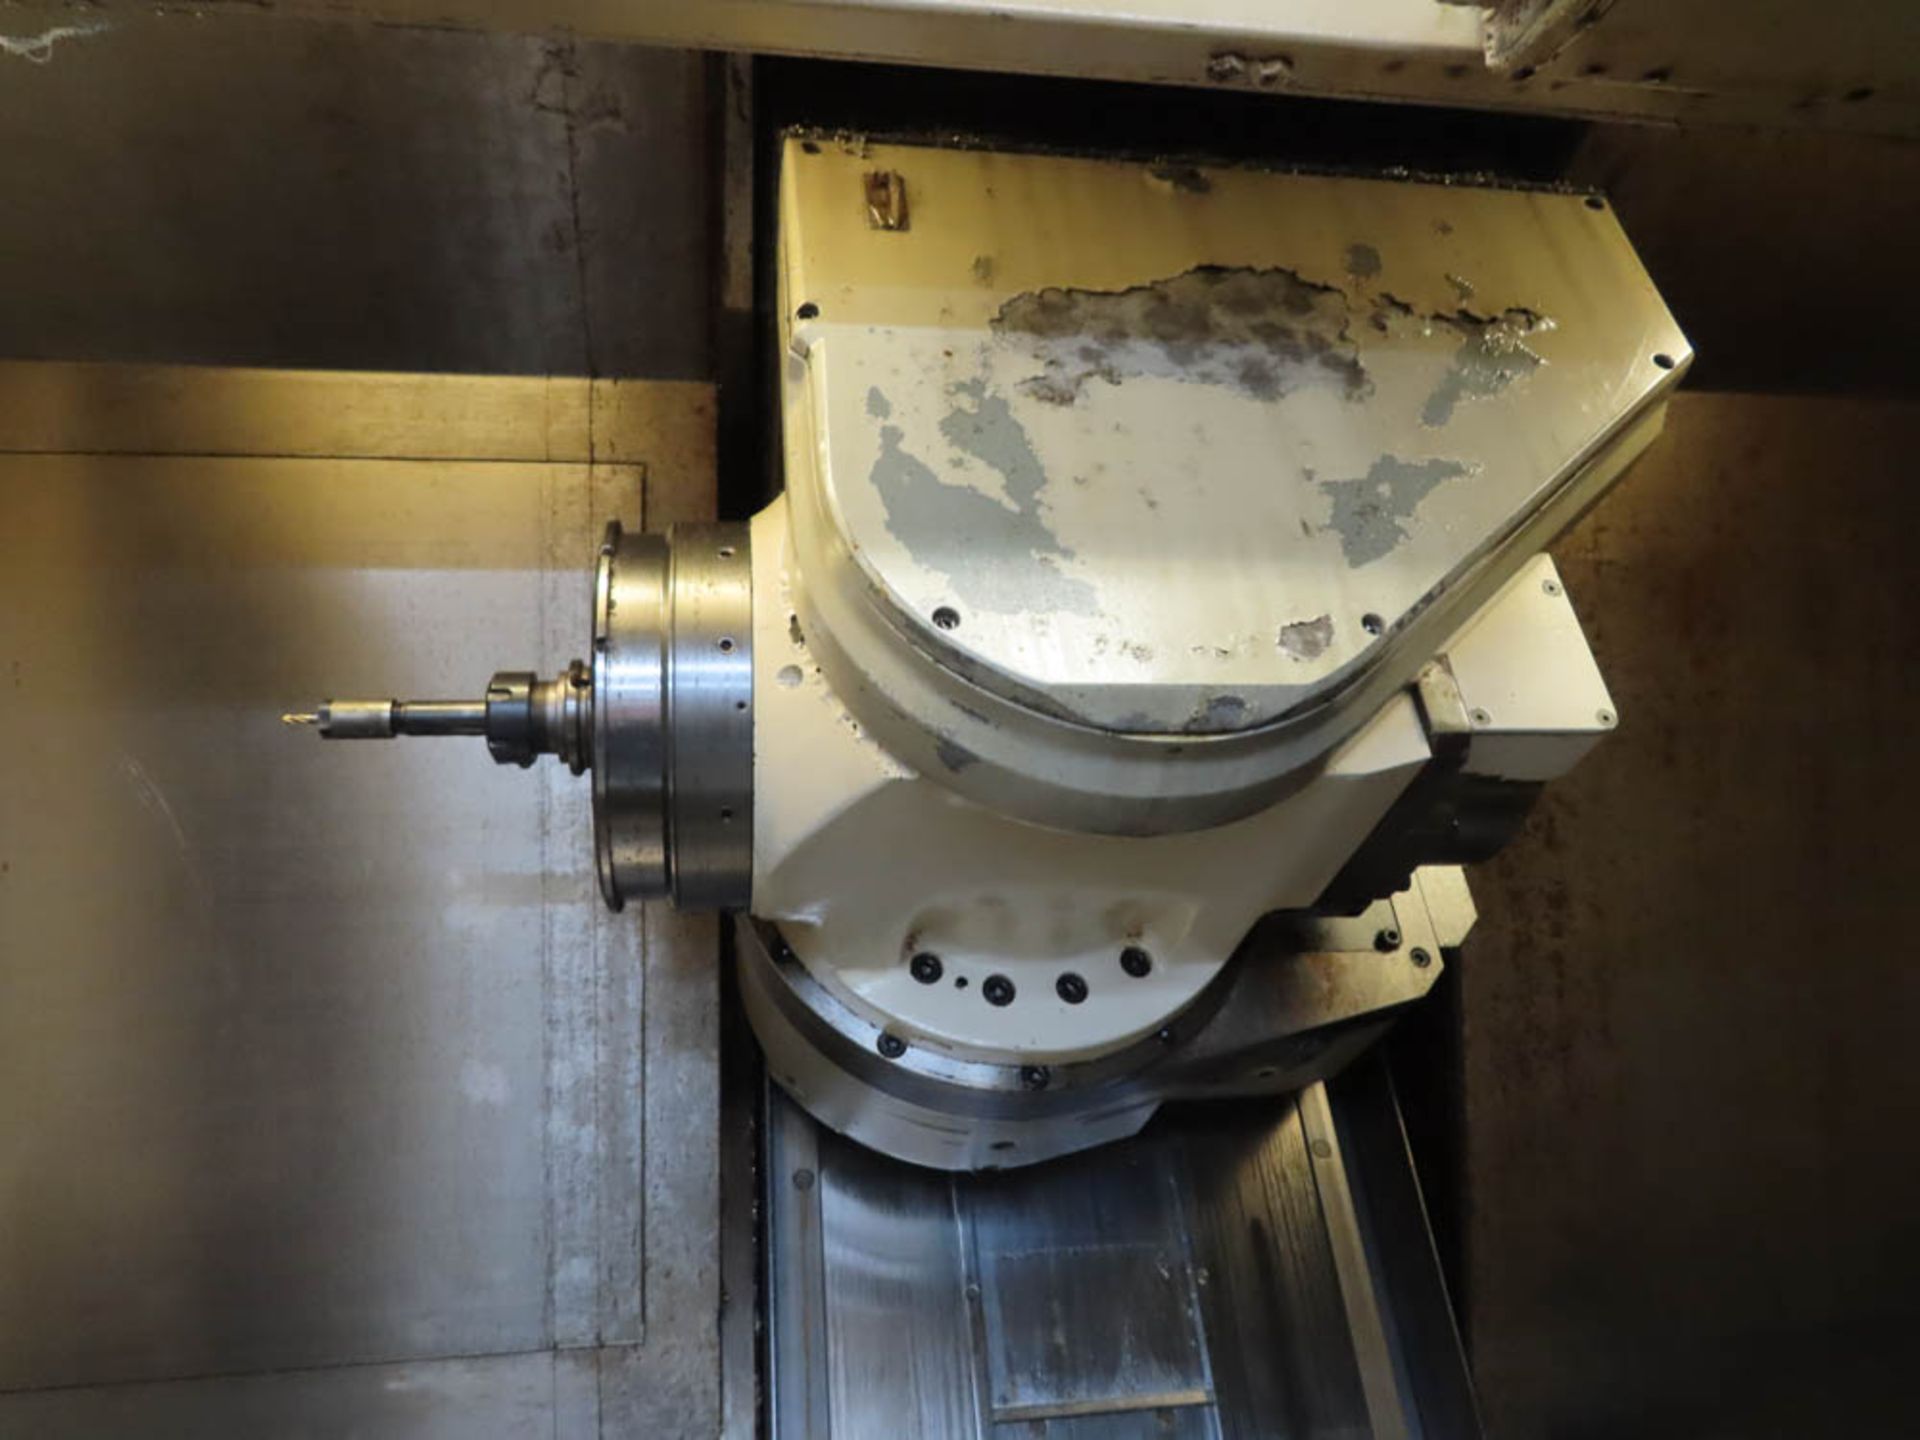 MAZAK "INTEGREX" 400-IIIST 5-AXIS CNC TURNING / MILLING CENTER, W/ SUB-SPINDLE, LOWER TURRET - Image 8 of 16